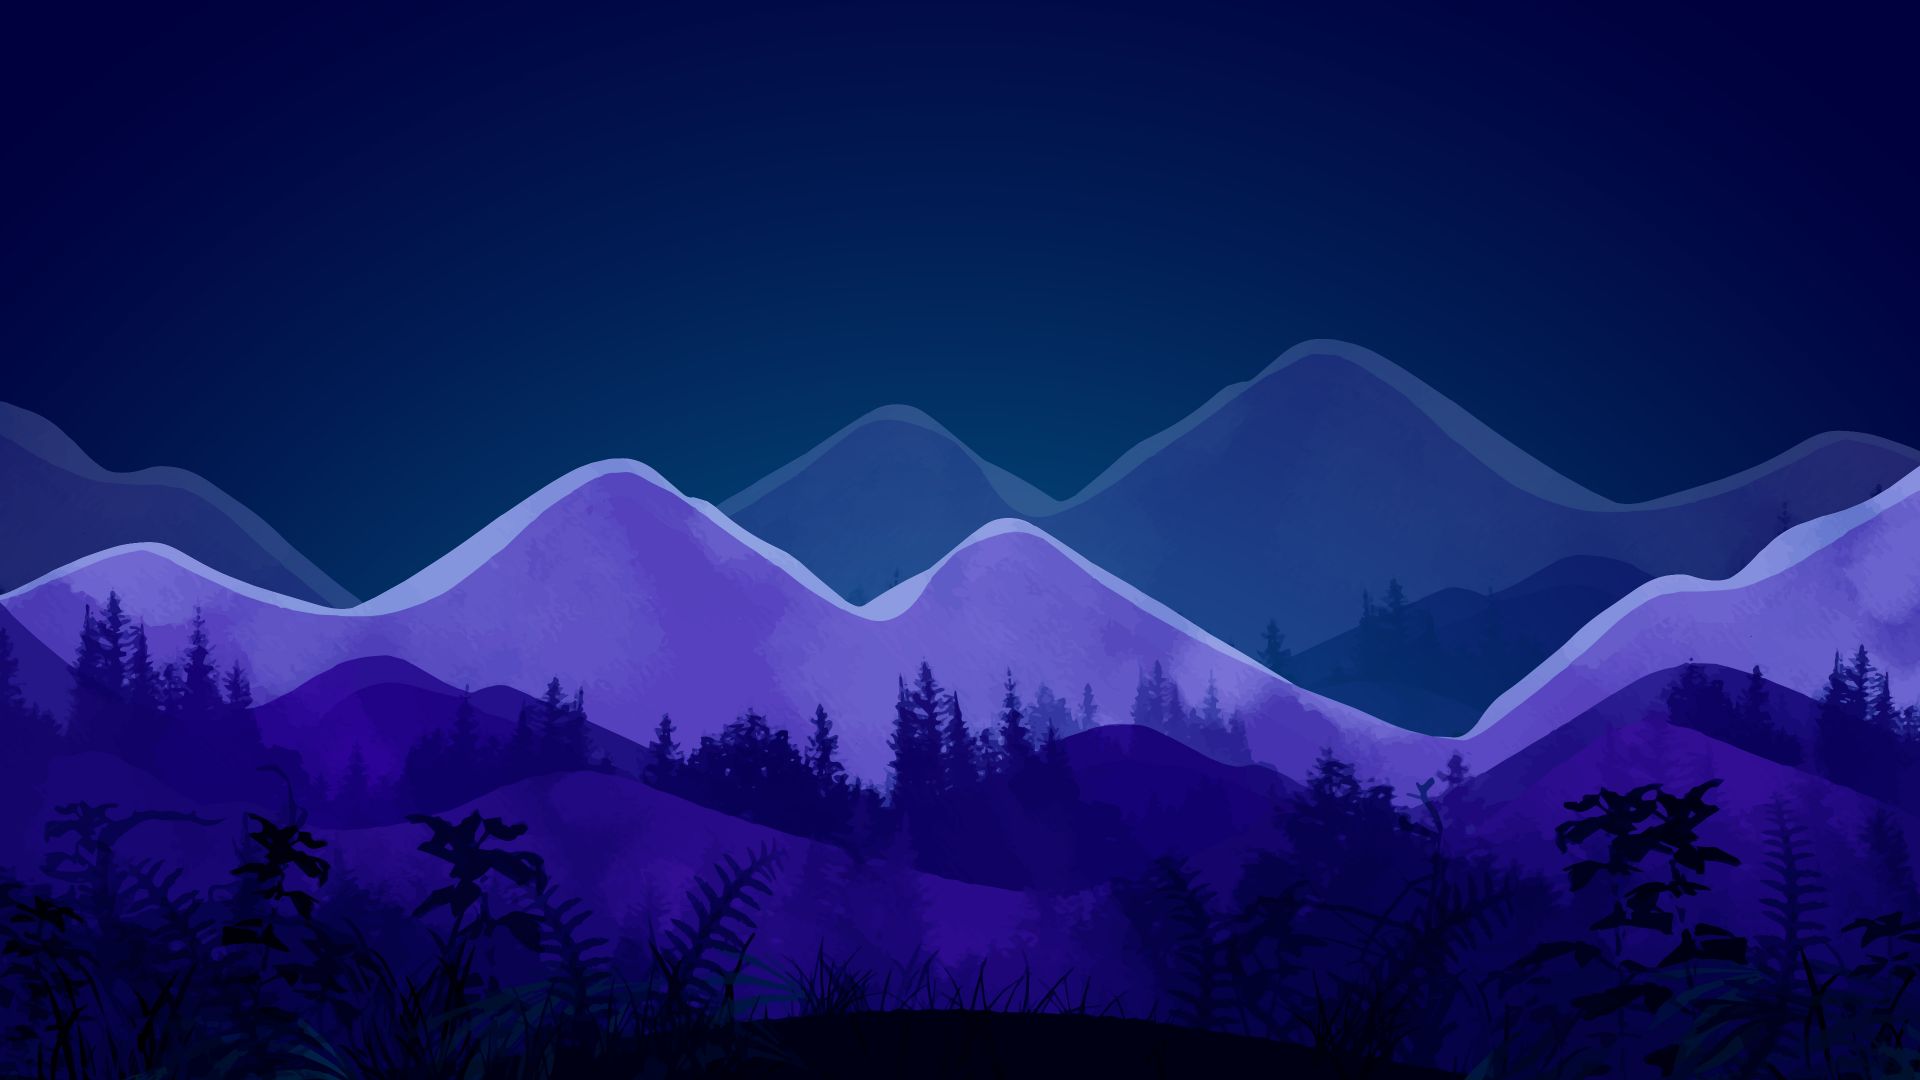 Mountain, minimalist, night of forest, artwork wallpaper, HD image, picture, background, 14b814